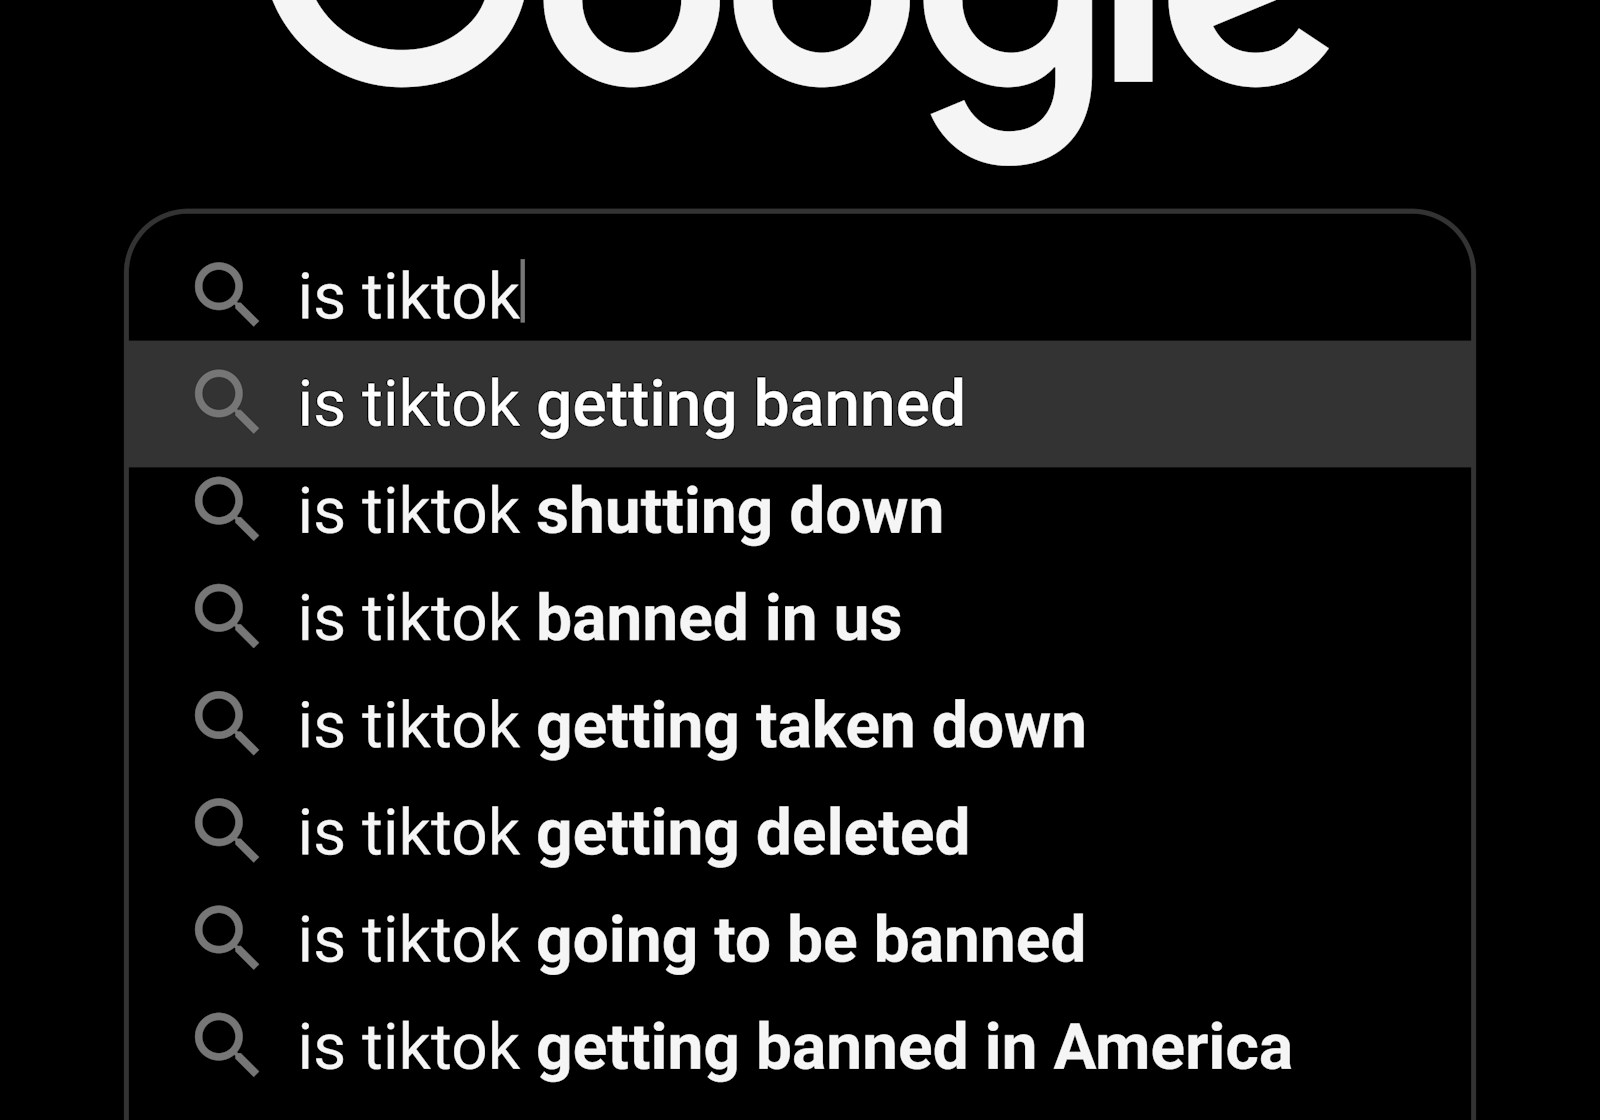 Frankly Organised - US Vote to Ban TikTok - For all your digital marketing needs trust Frankly Organised